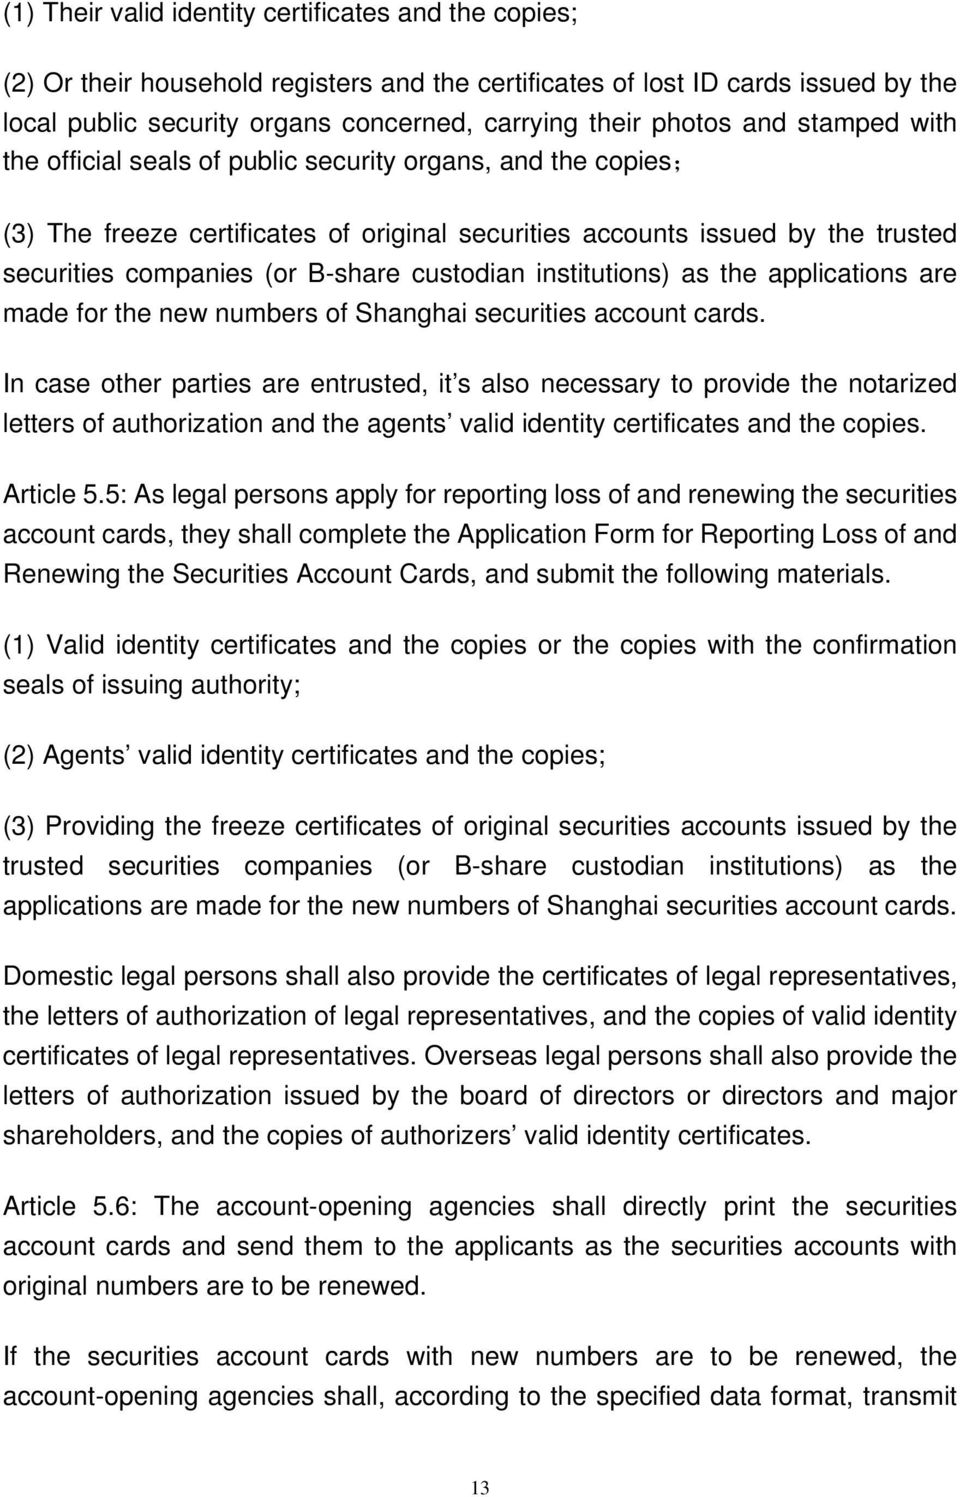 B-share custodian institutions) as the applications are made for the new numbers of Shanghai securities account cards.